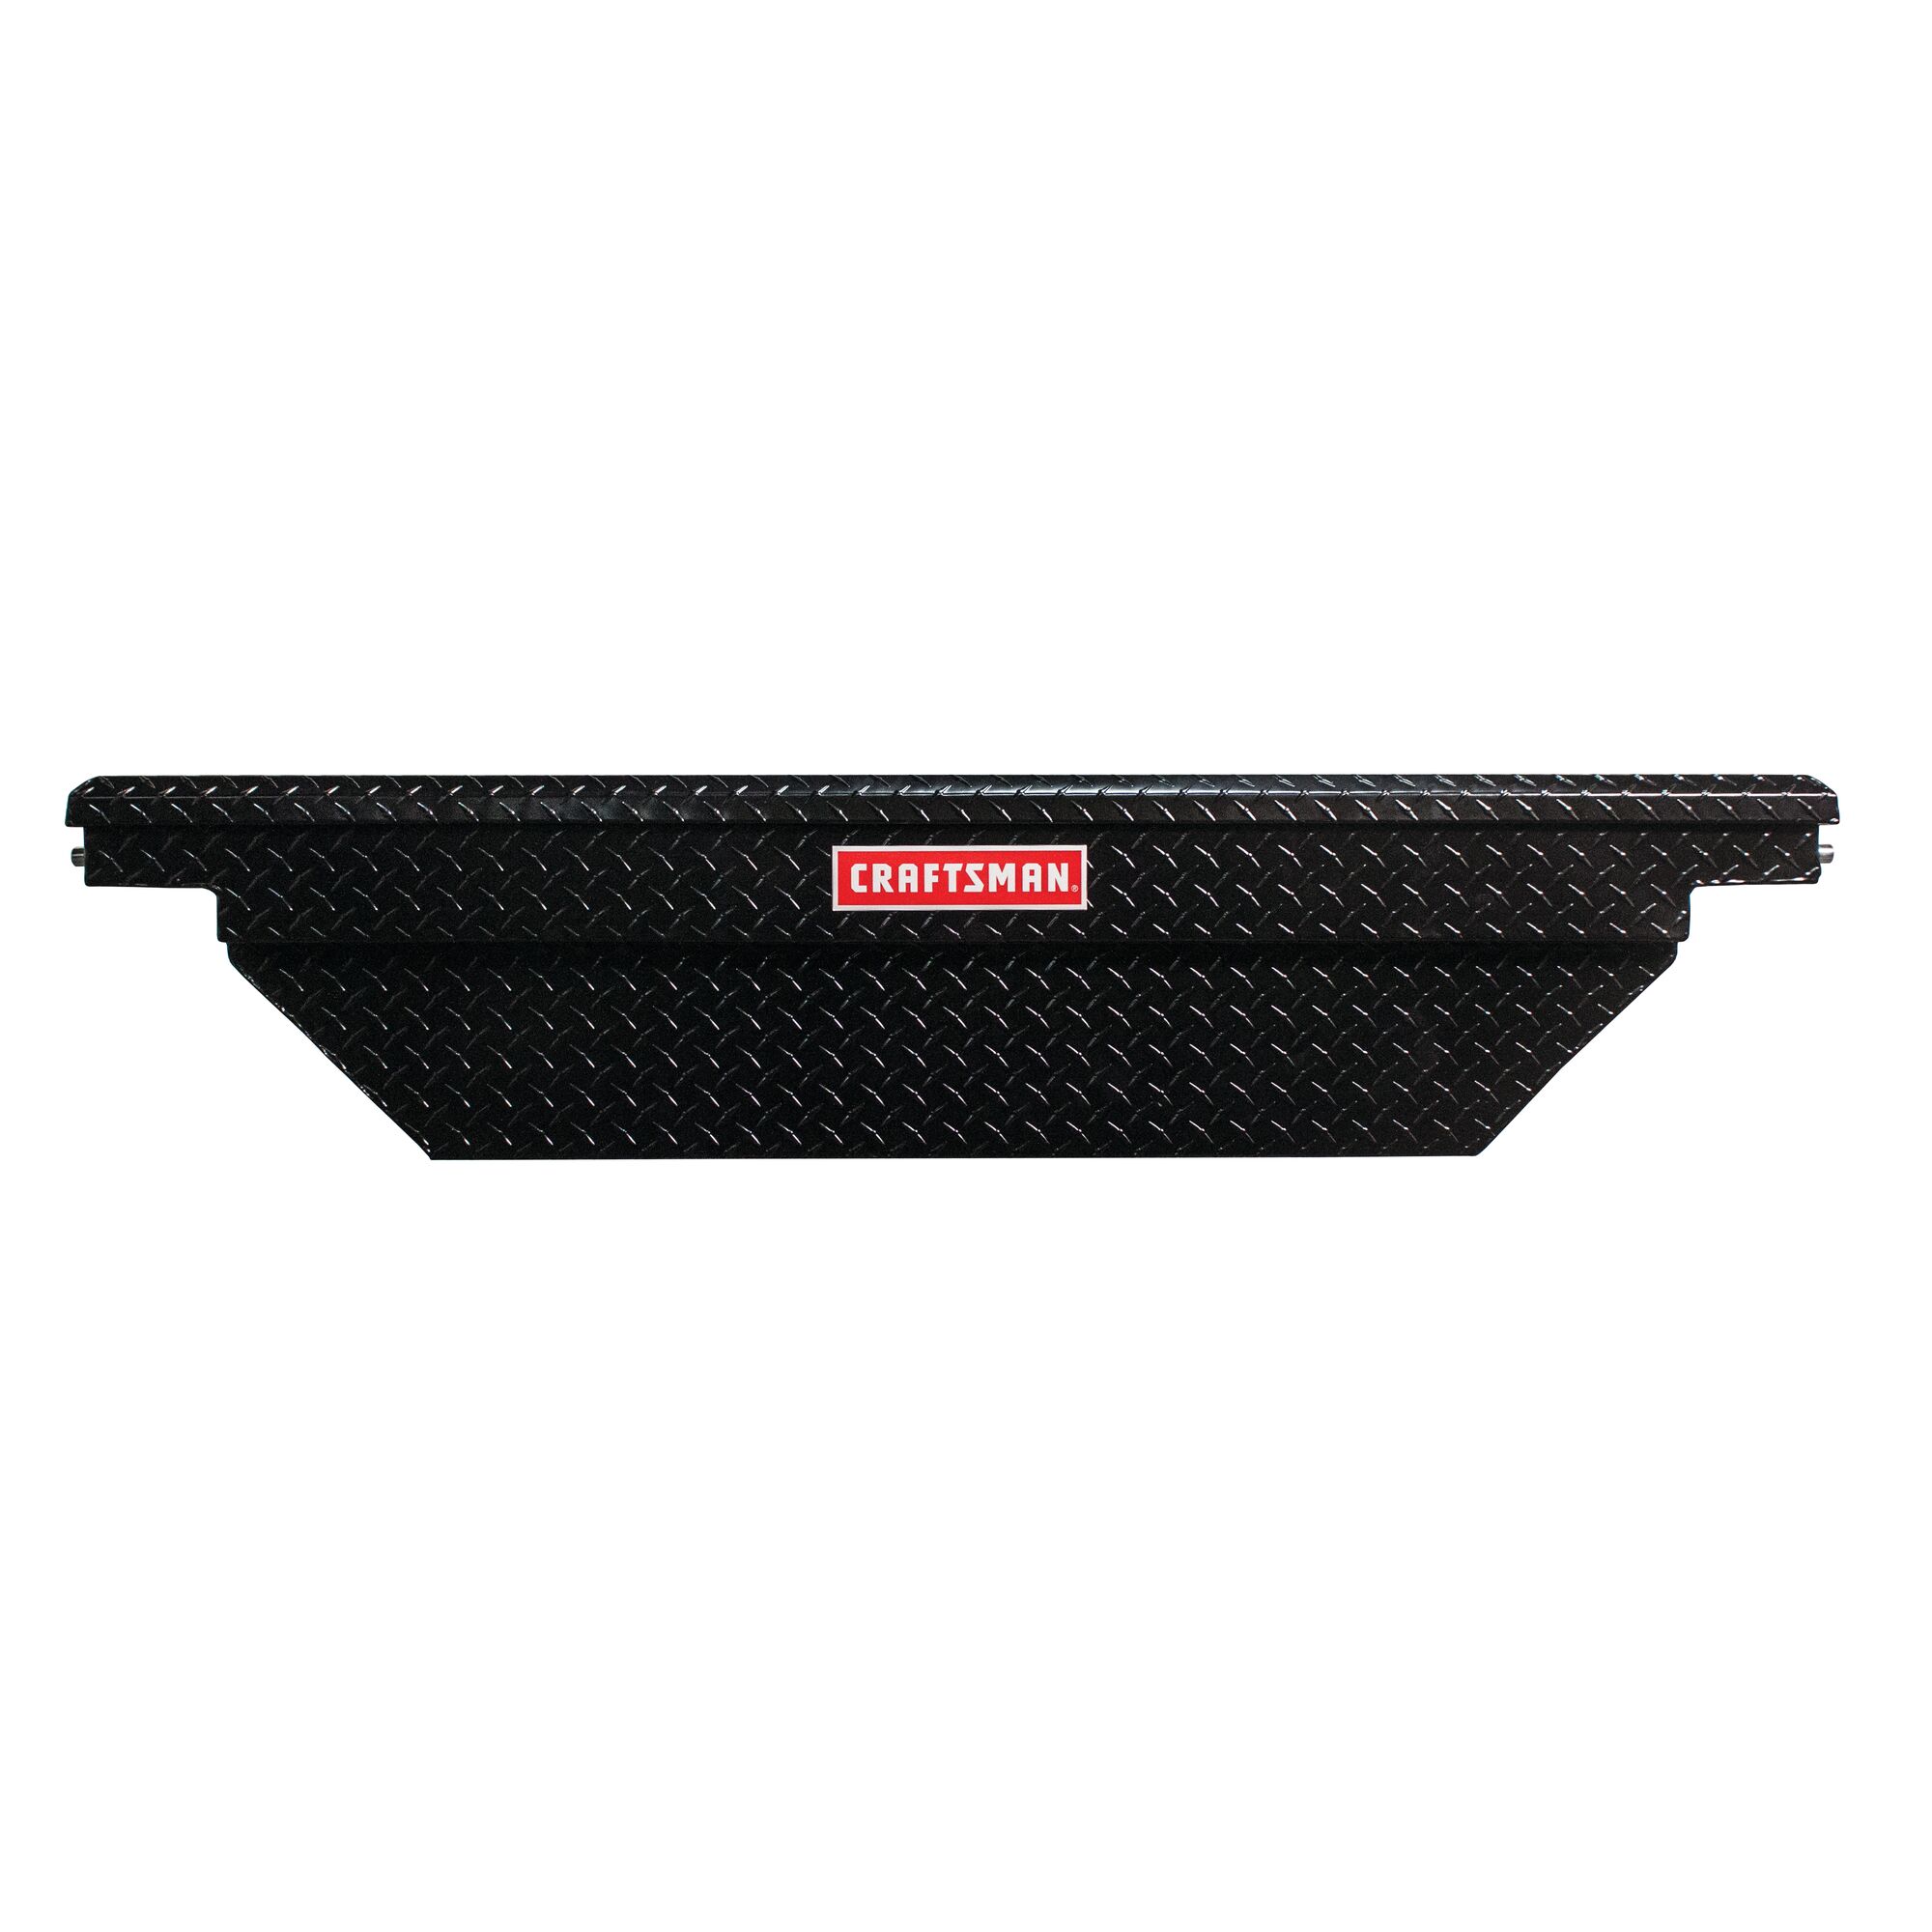 61.5 inch by 20 inch by 13 inch Matte black aluminum crossover truck tool box.